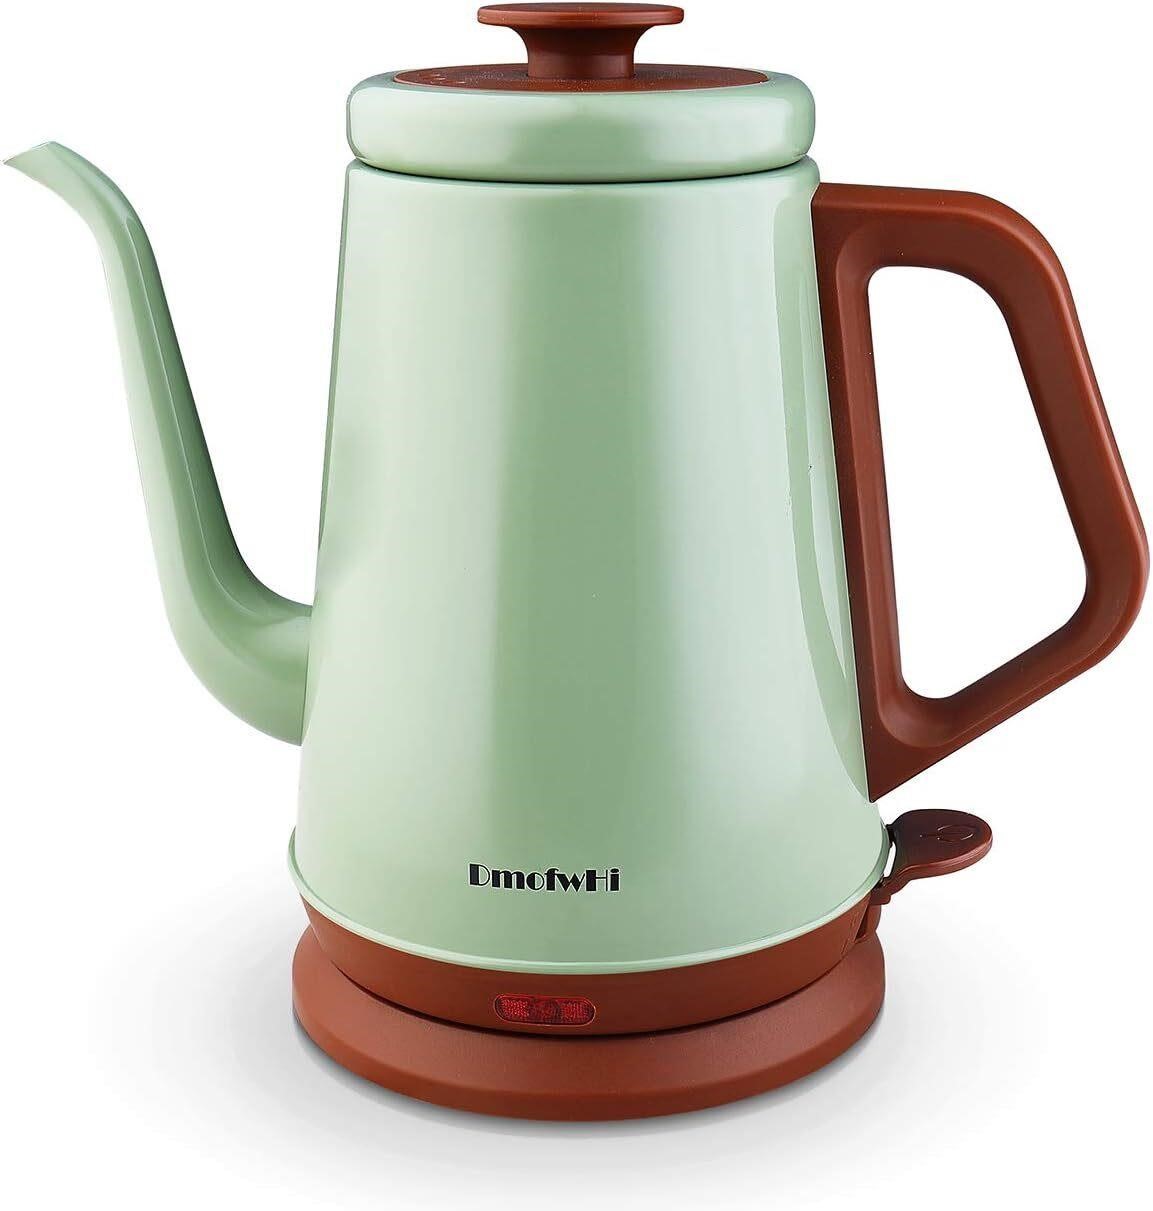 DmofwHi Electric Kettle(1.0L) - Steel  Green